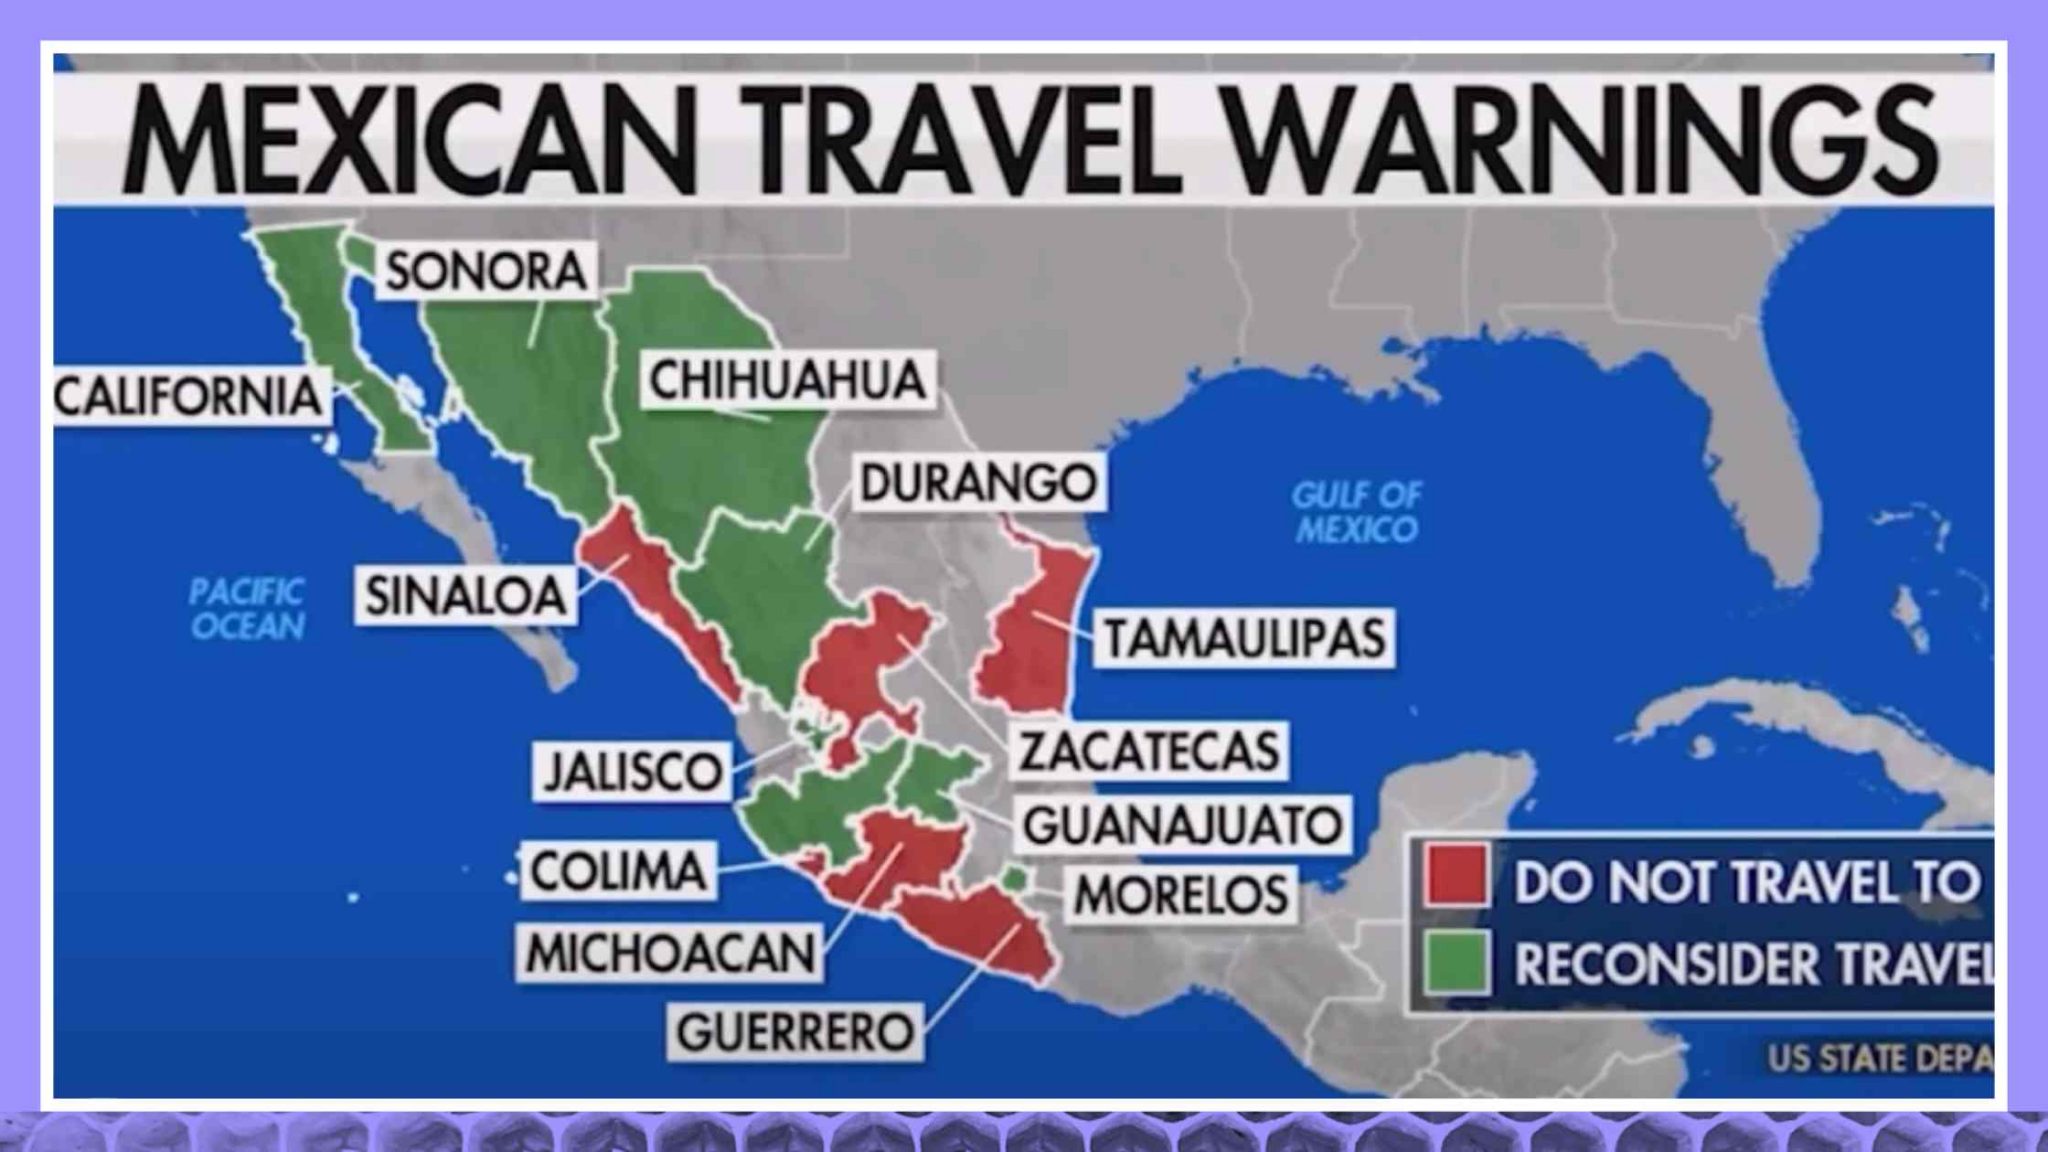 do not travel warning to six of mexico 31 states